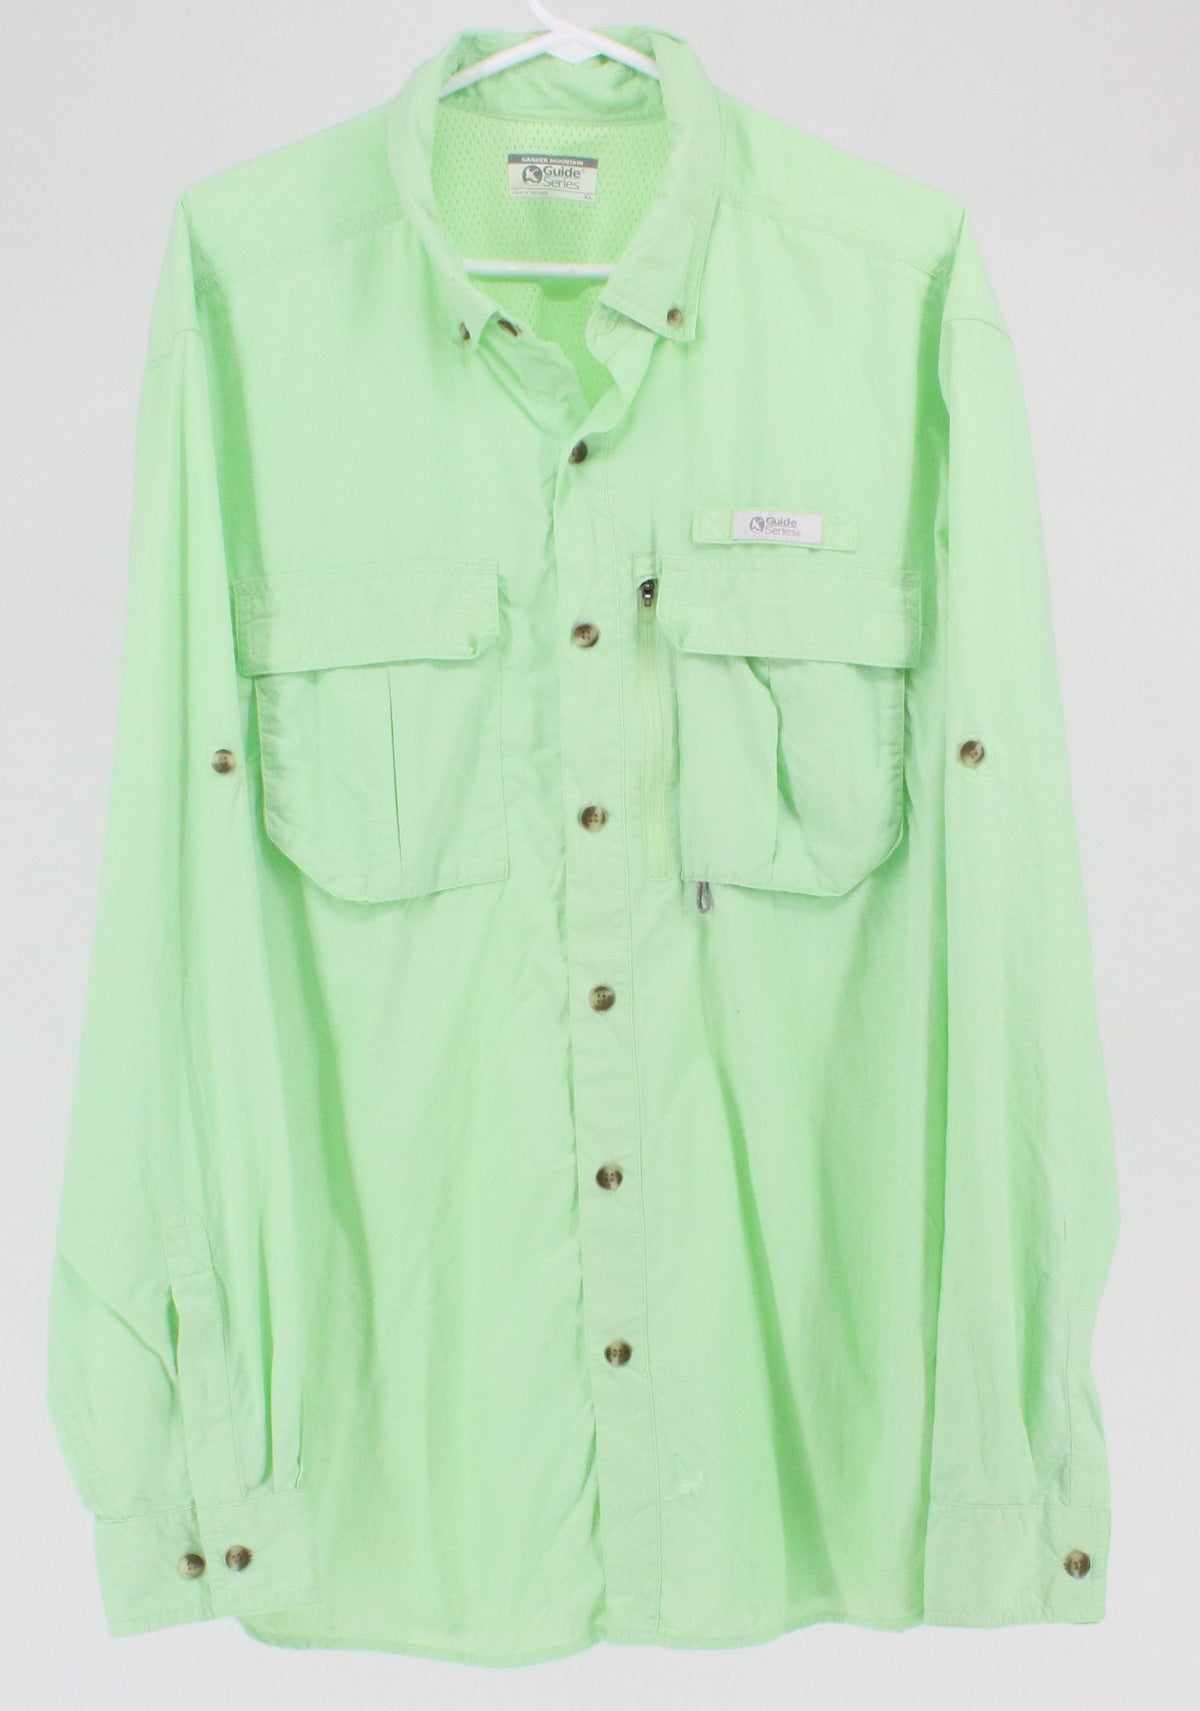 Gander Mountain Guide Series Green Cargo Shirt With Back Flap